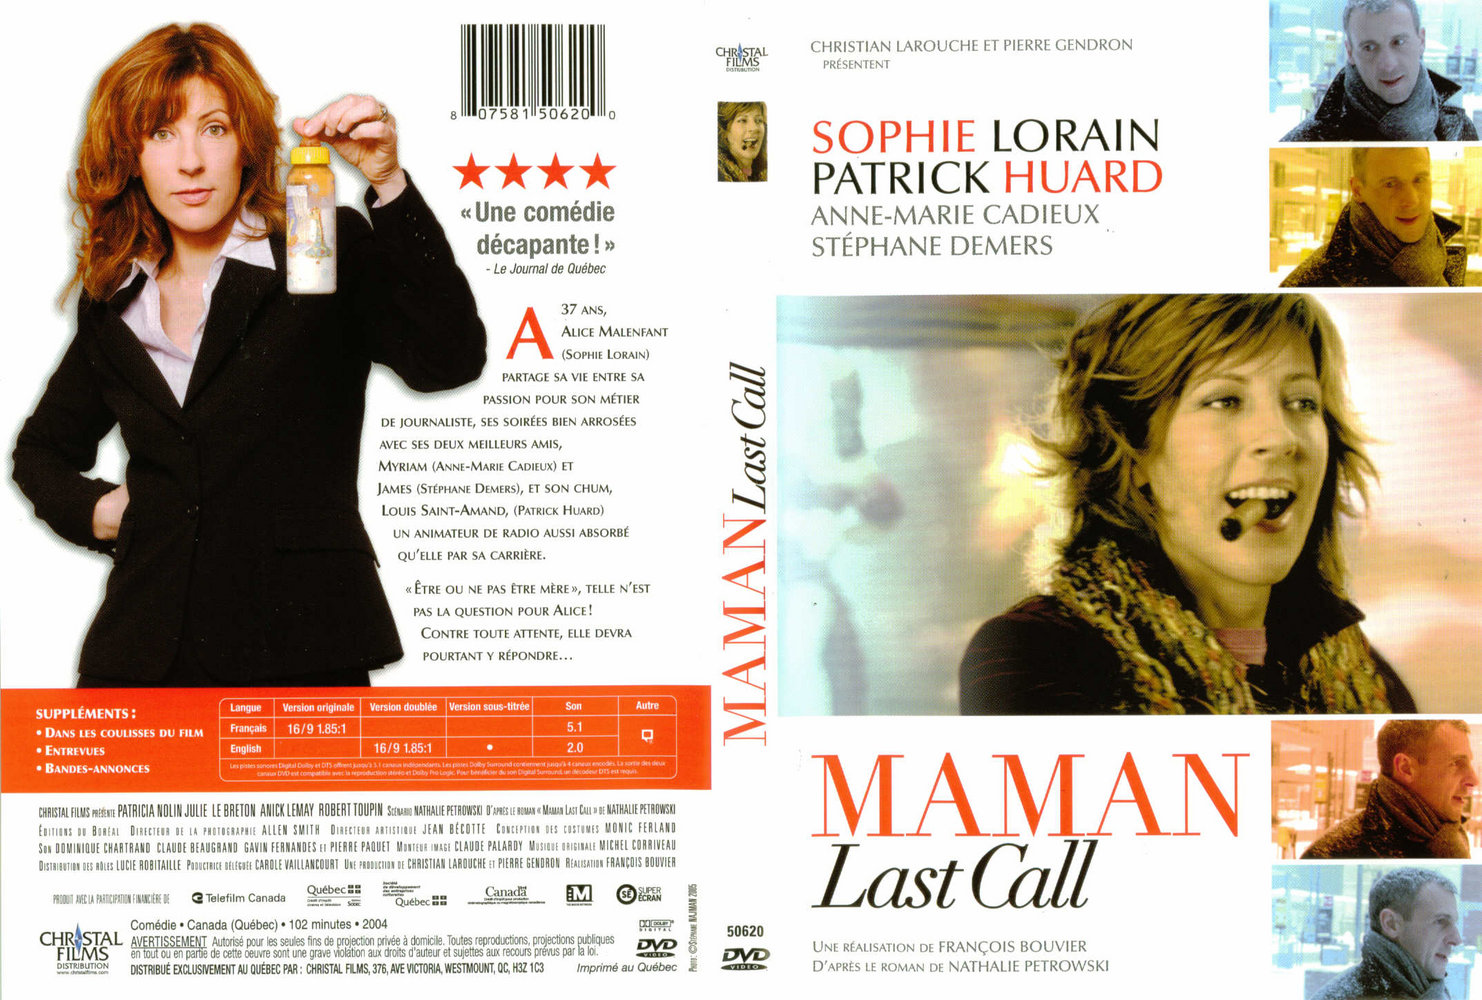 Jaquette DVD Maman Last Call